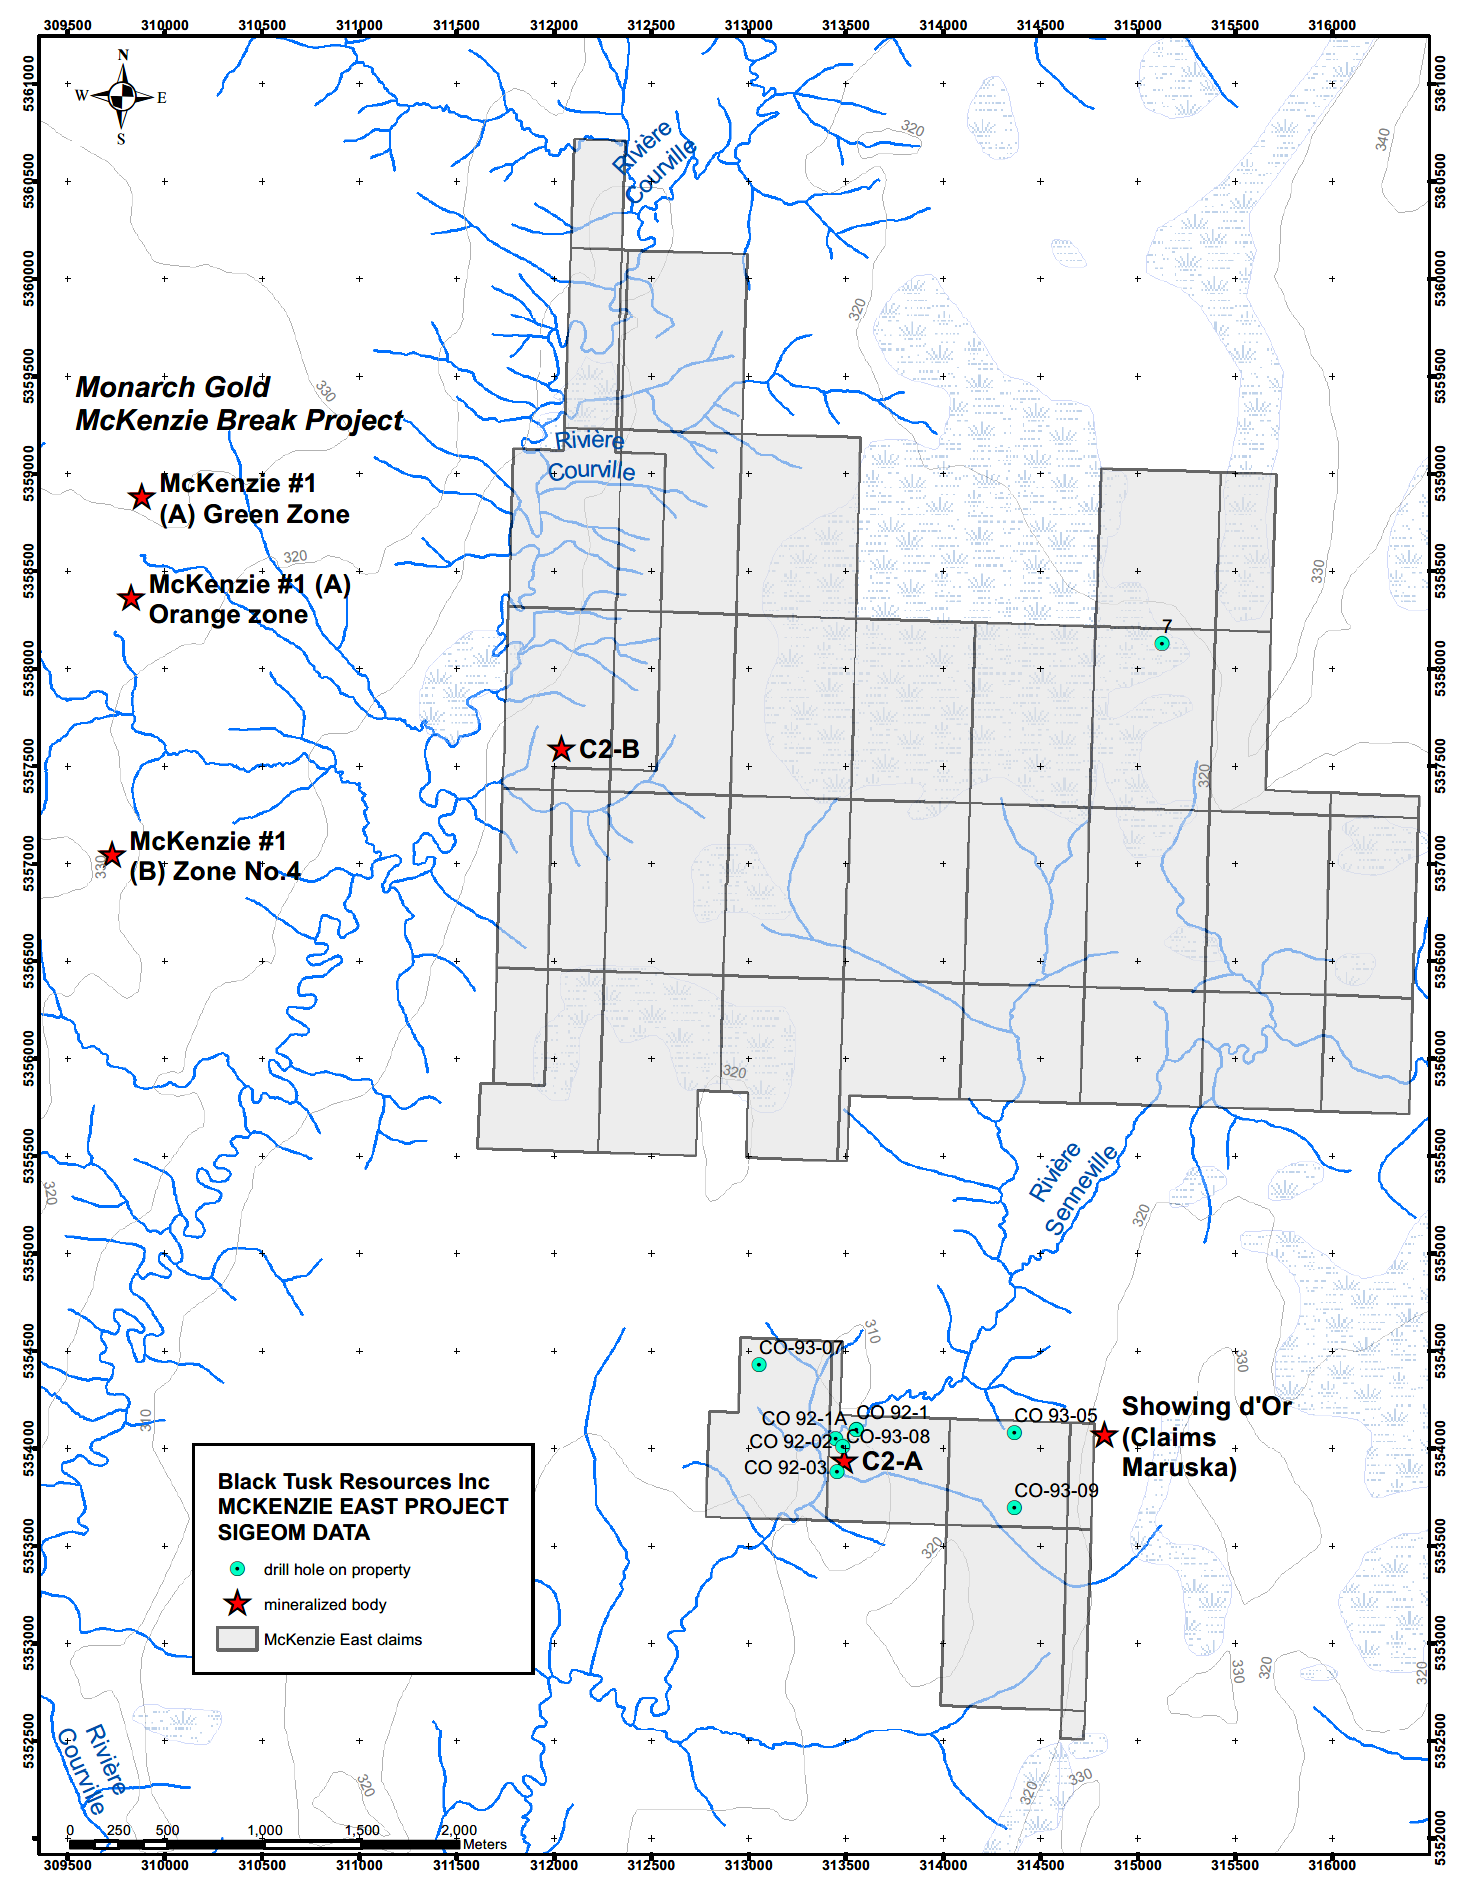 Black Tusk Resources Inc, Thursday, March 26, 2020, Press release picture